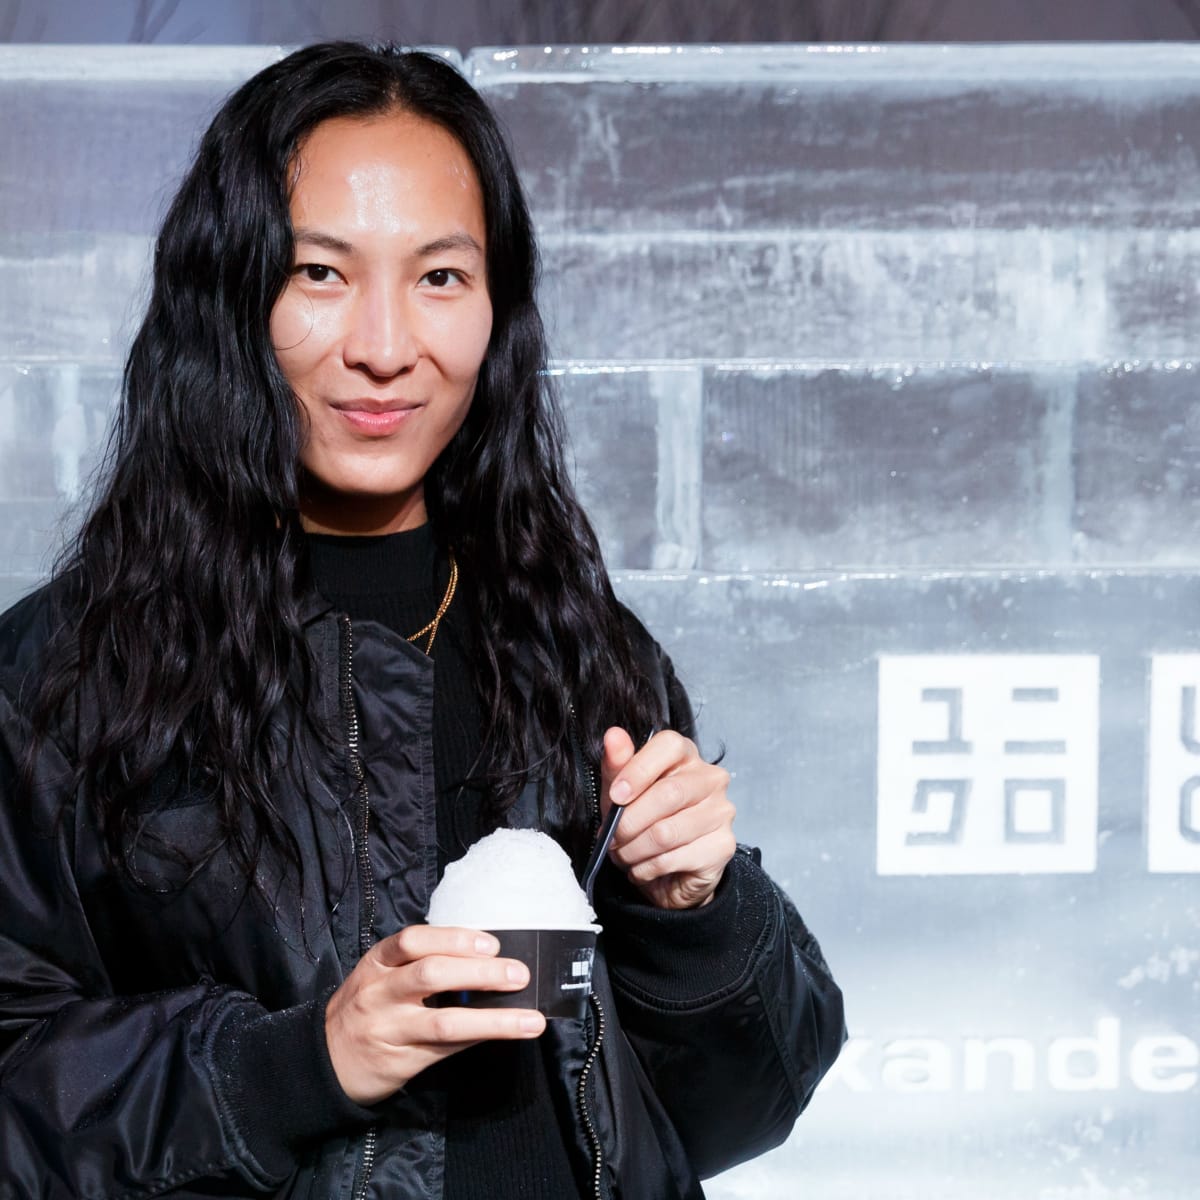 Alexander Wang x Uniqlo Heattech Collaboration Capsule Collection